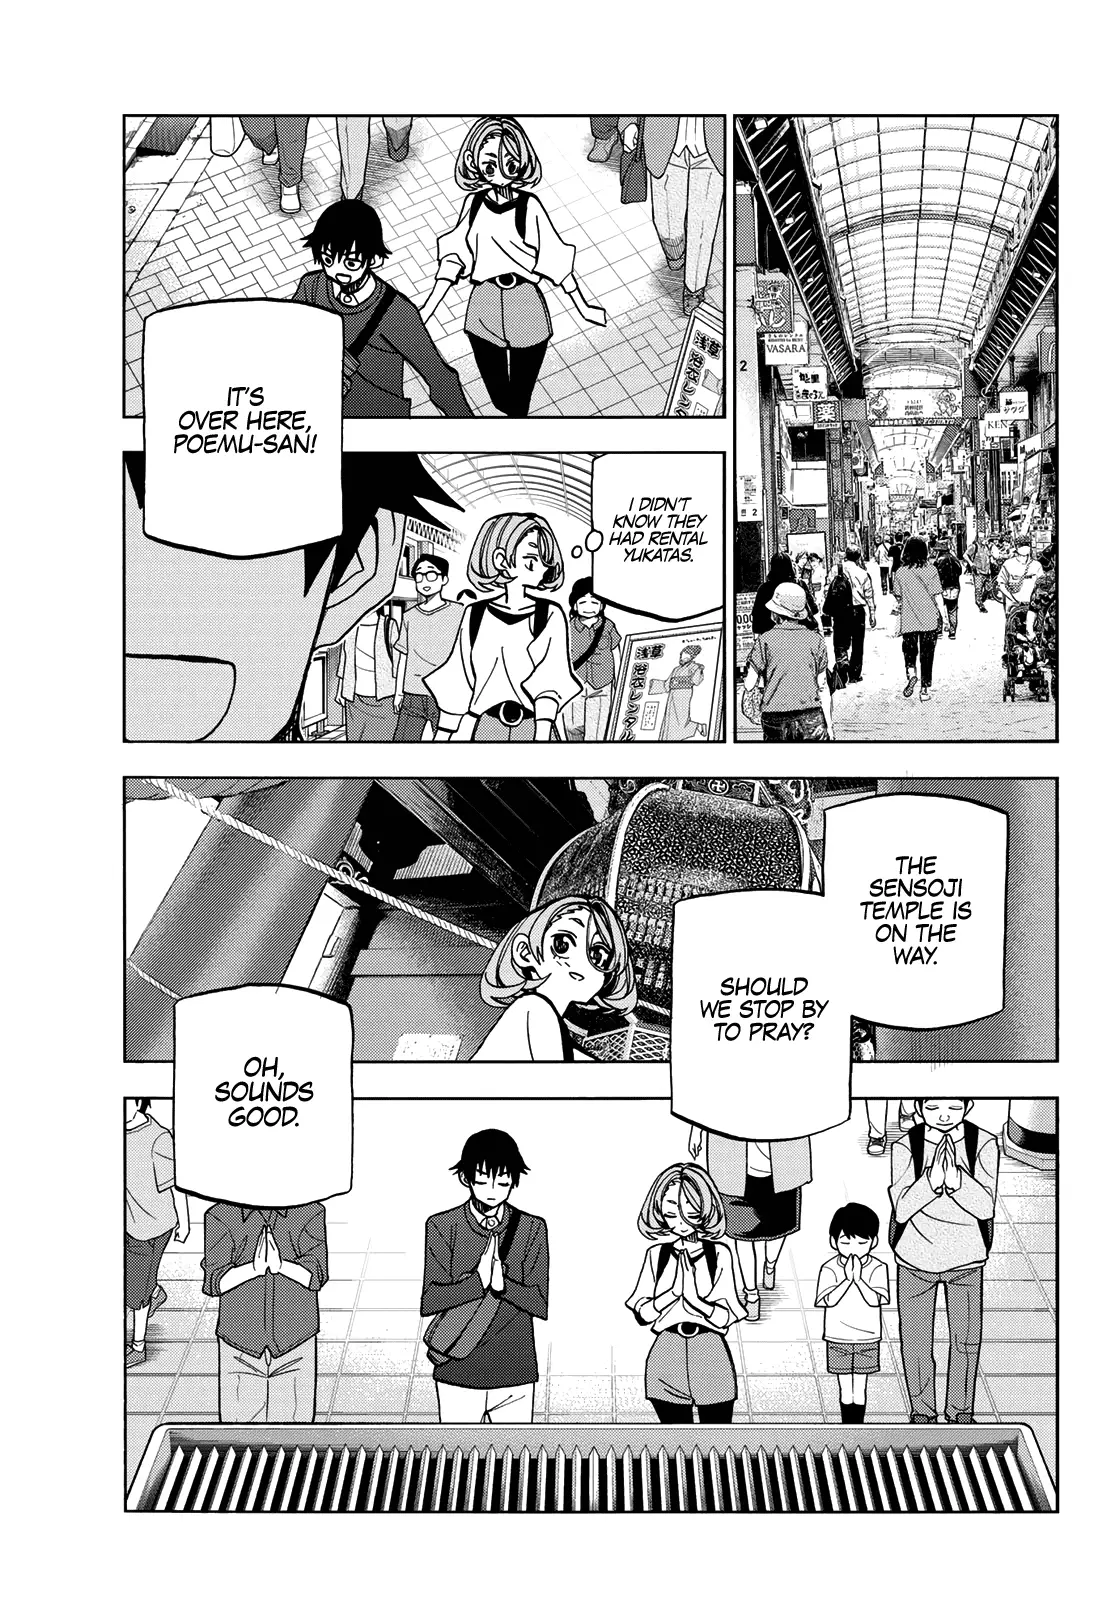 The Story Between A Dumb Prefect And A High School Girl With An Inappropriate Skirt Length - 39 page 5